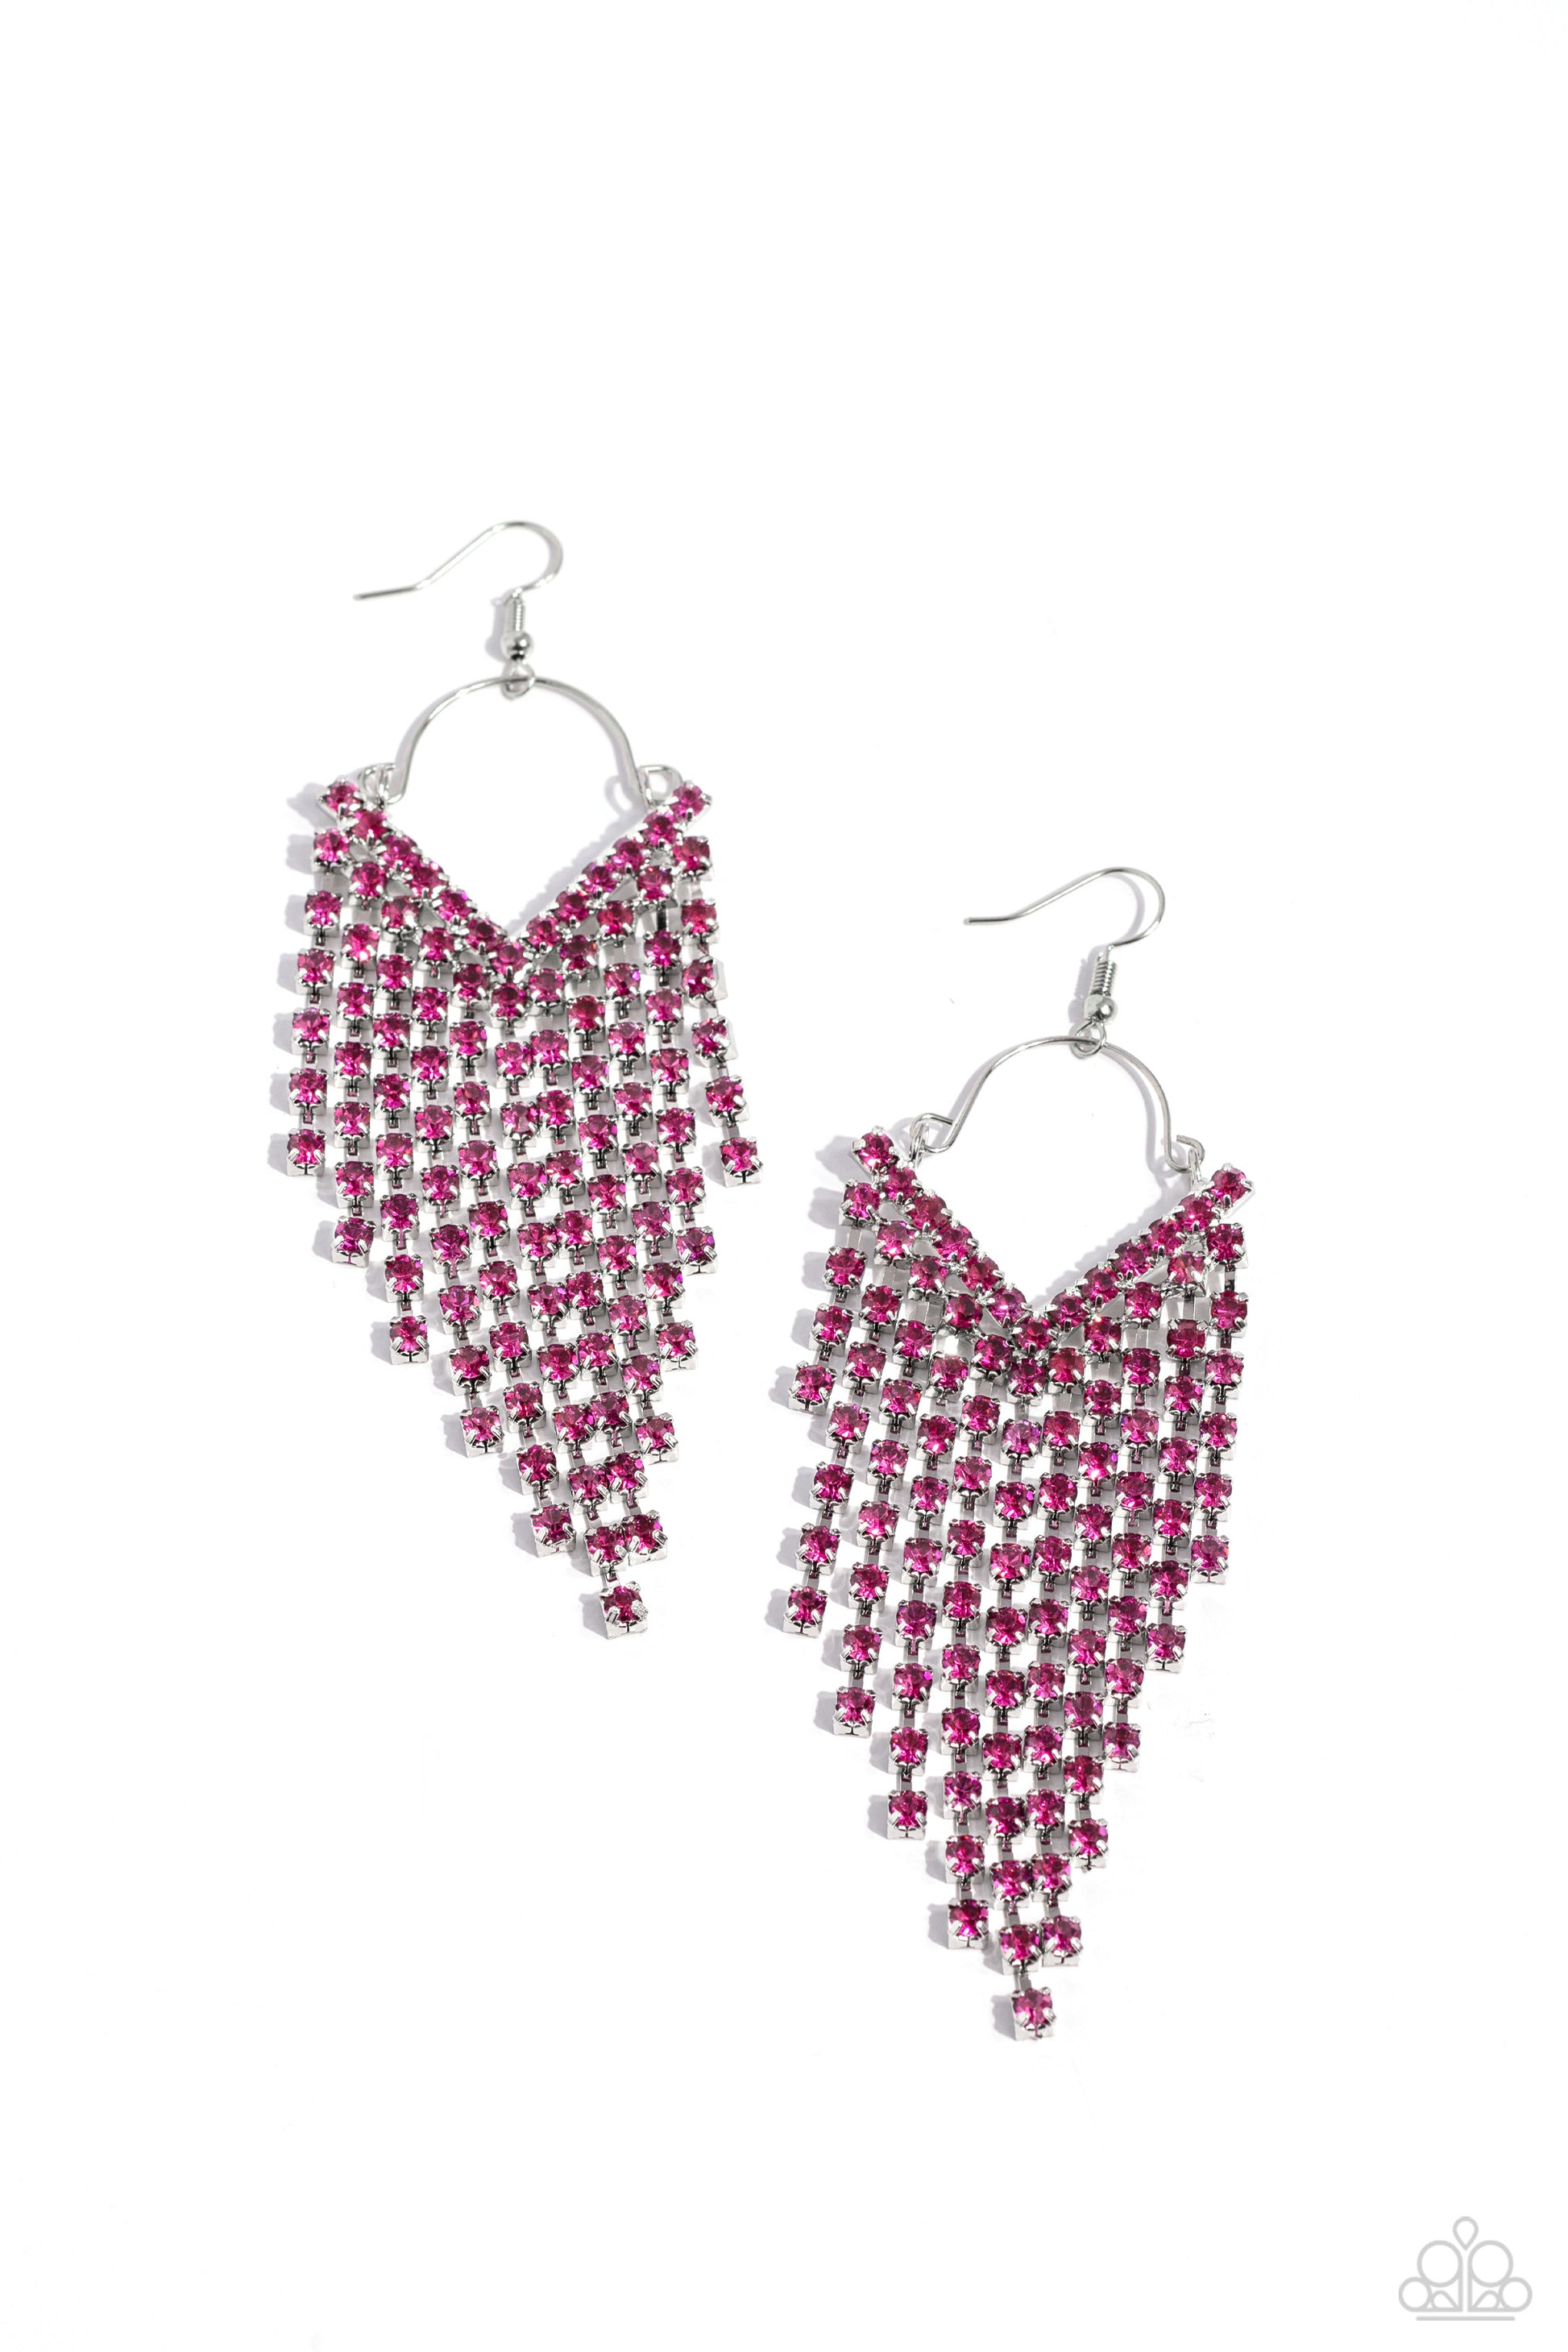 V Fallin Pink Rhinestone Earring - Paparazzi Accessories  Attached to a dainty silver wire fitting, strands of glittery fuchsia rhinestones pressed in sleek silver fittings free fall from the ear into an edgy v-shaped cascade for a bold look. Earring attaches to a standard fishhook fitting.  Sold as one pair of earrings.  P5RE-PKXX-269XX